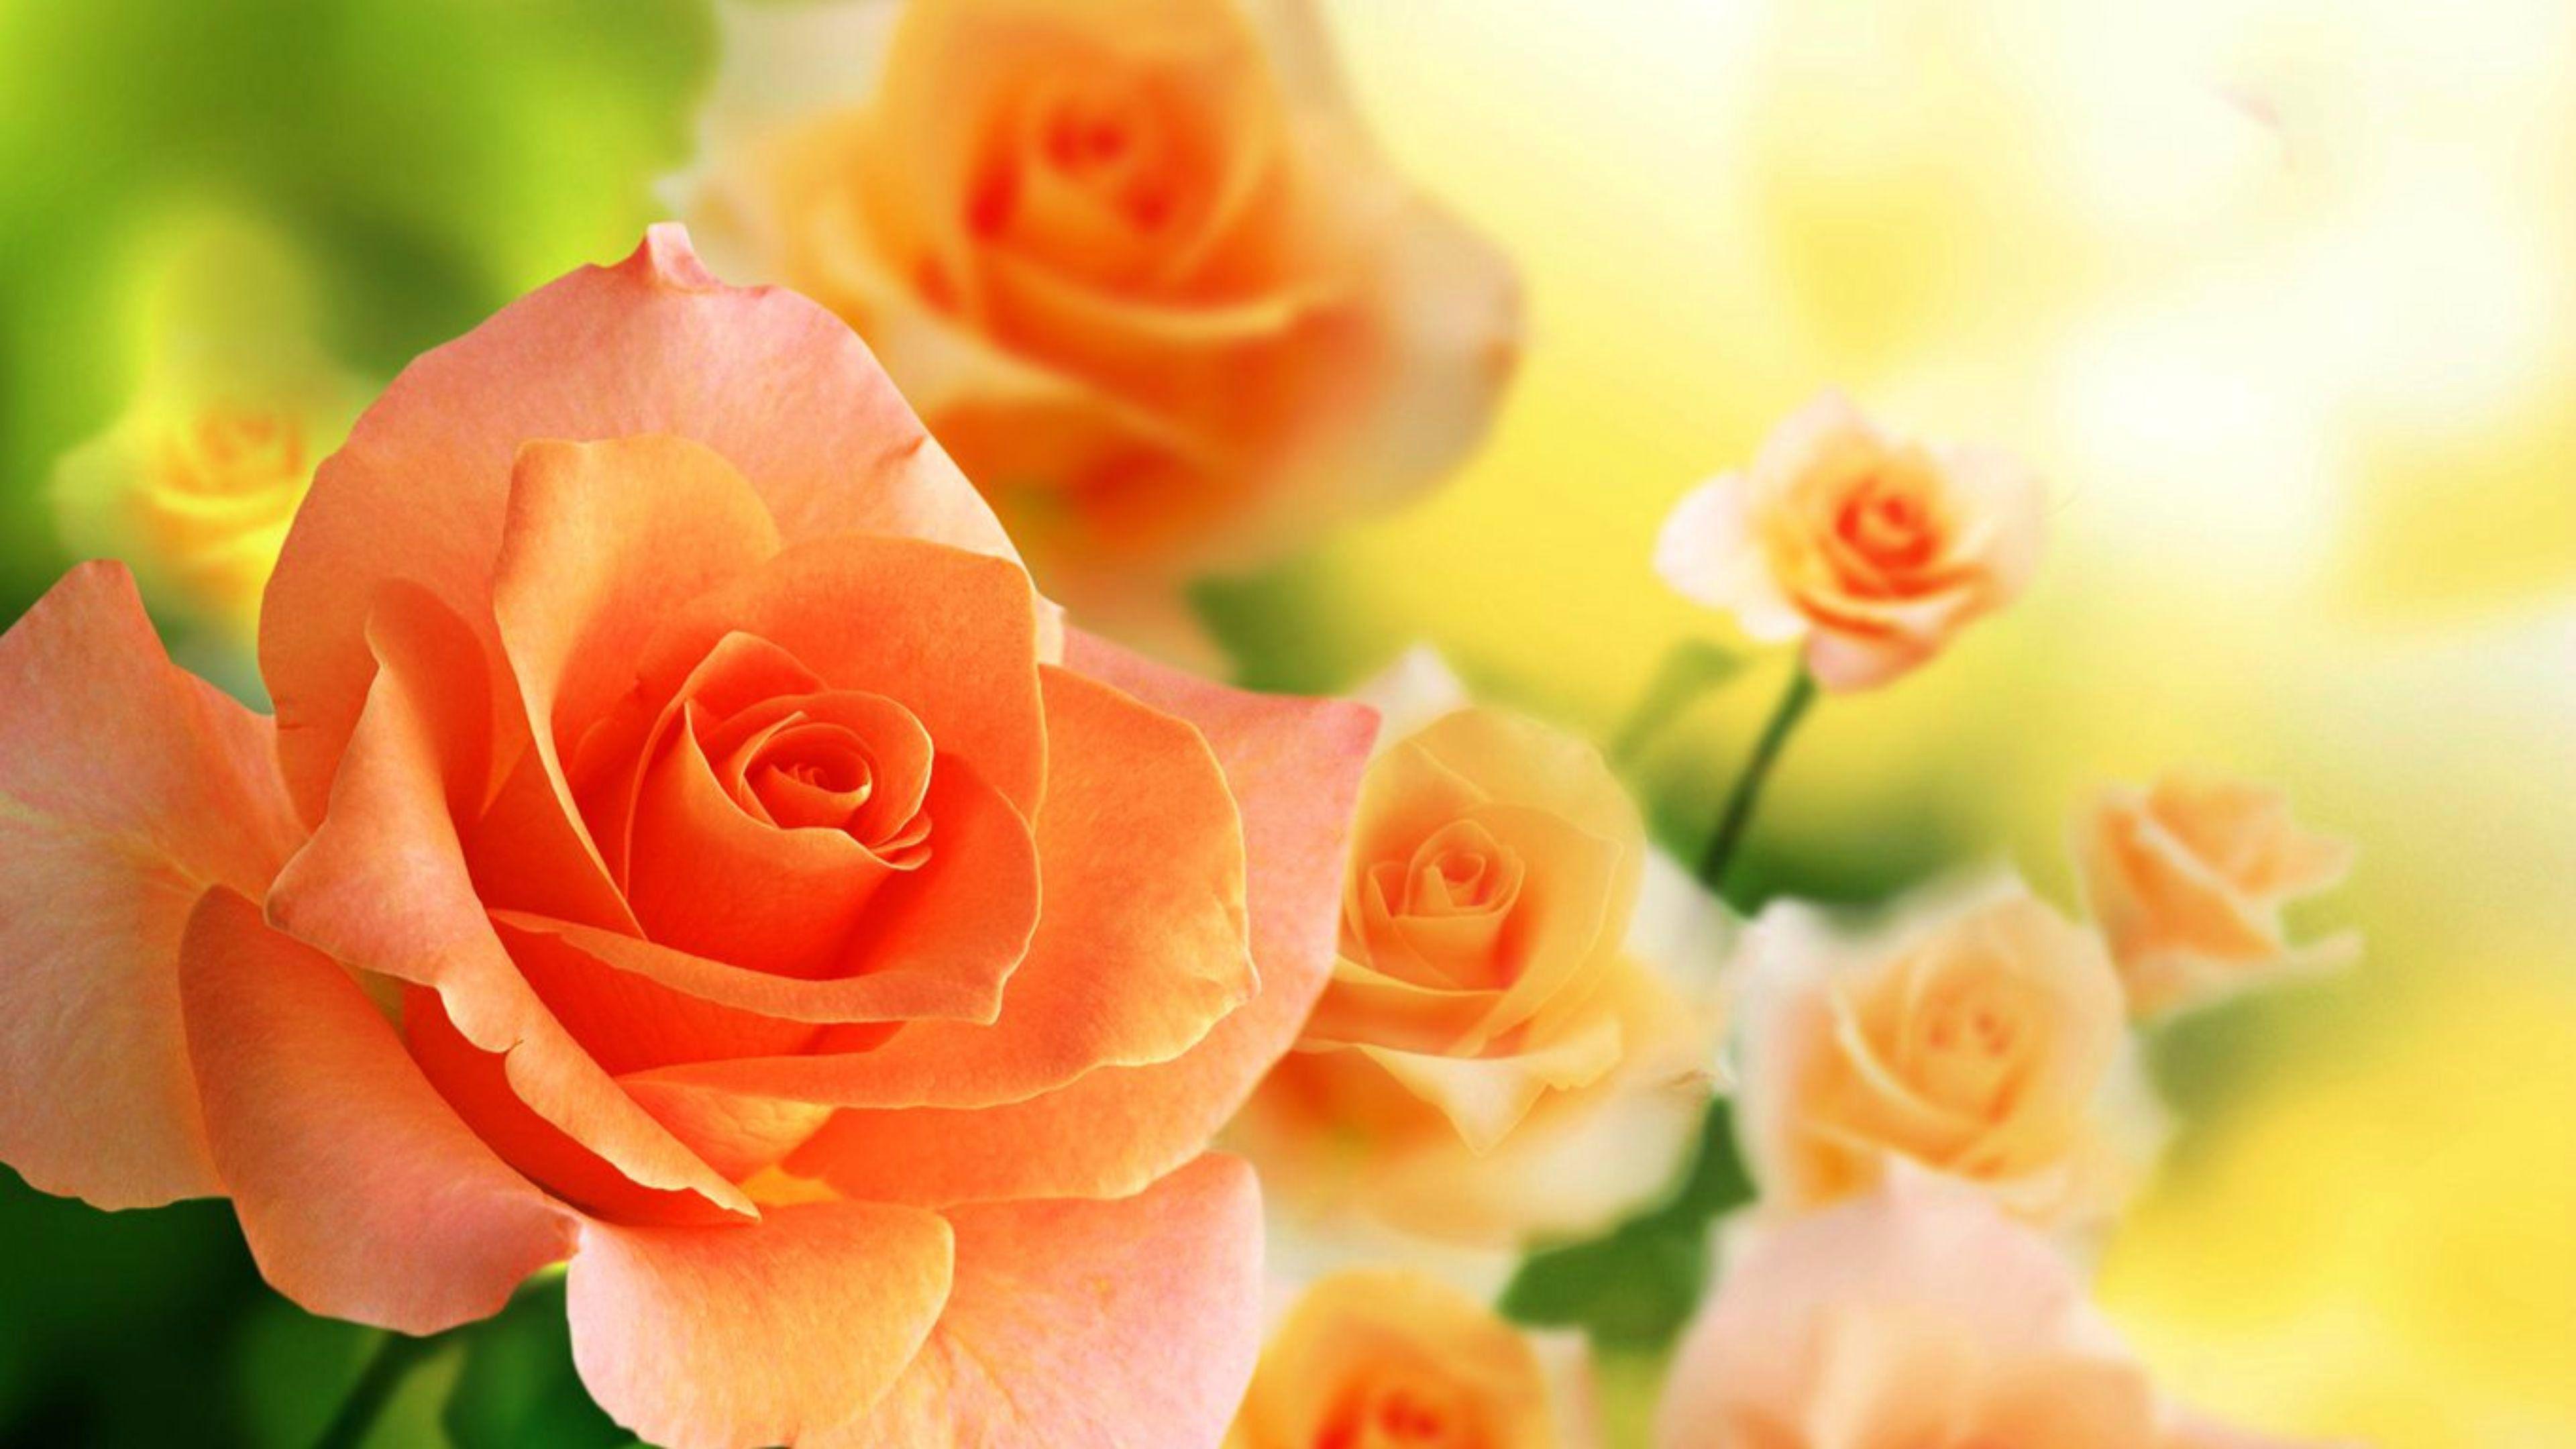 Wallpaper Most Beautiful Orange Rose In The World HD Image With